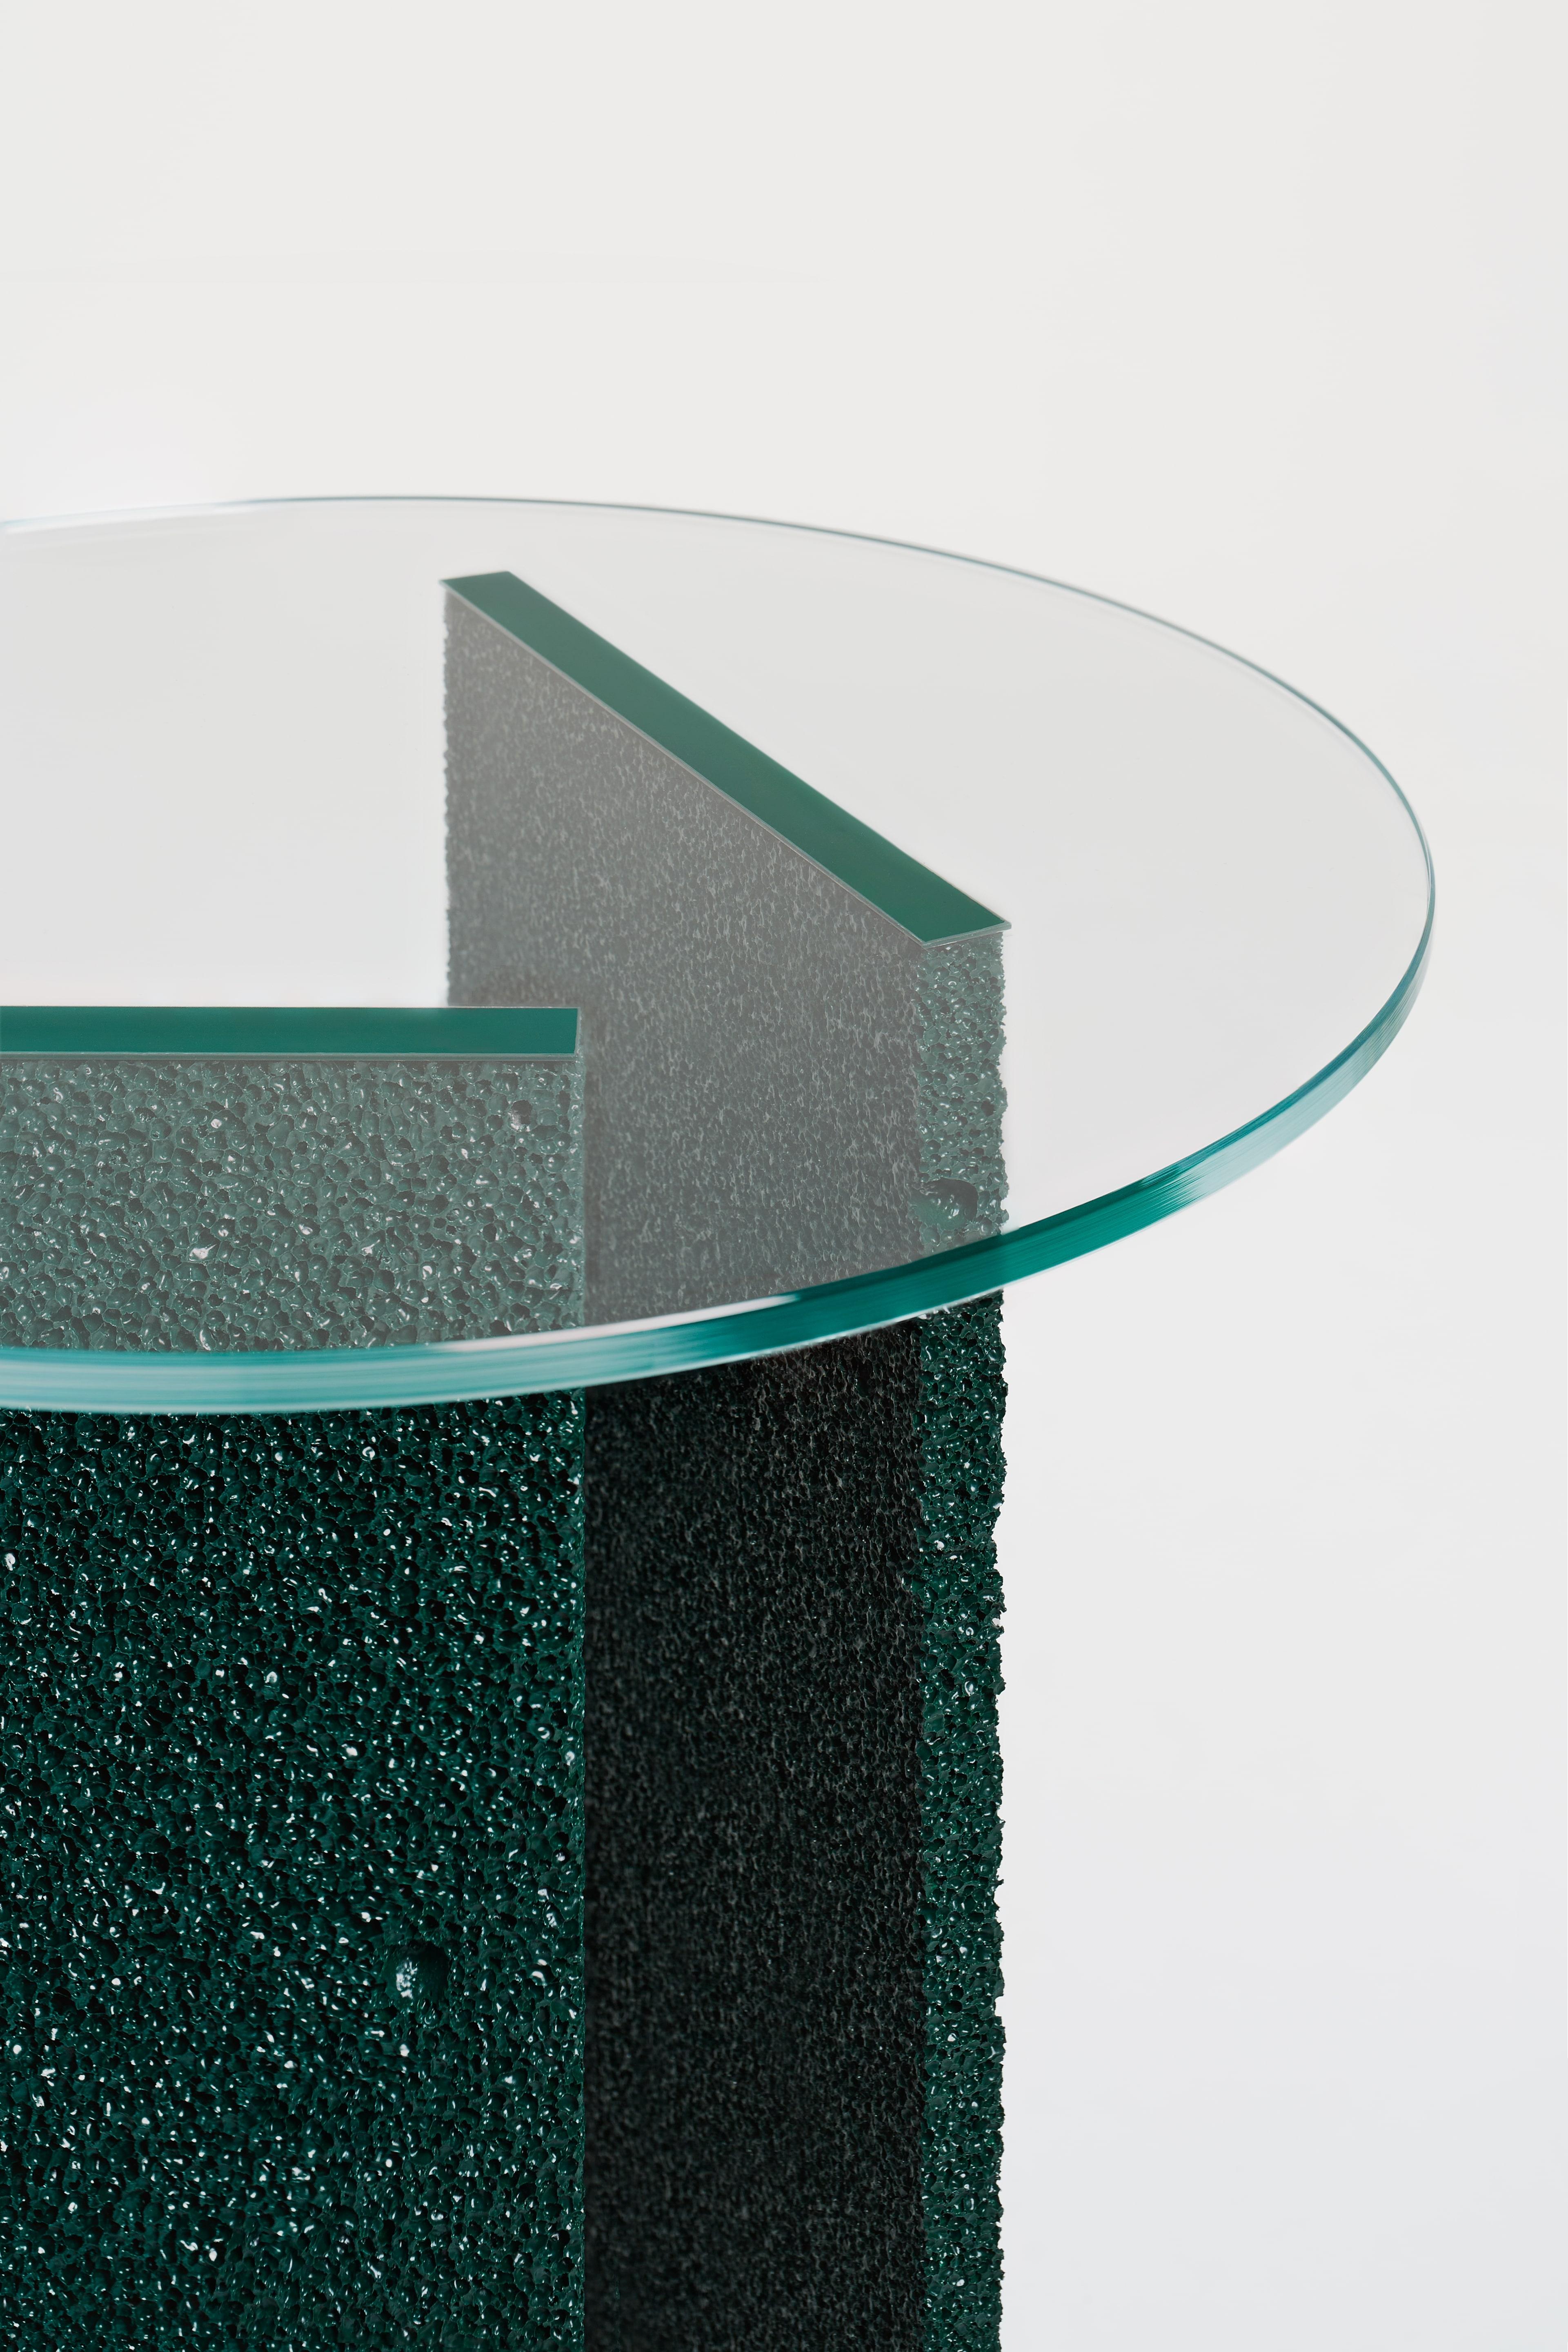 British SLAB Dark Green Textured Side Table With Glass Top For Sale